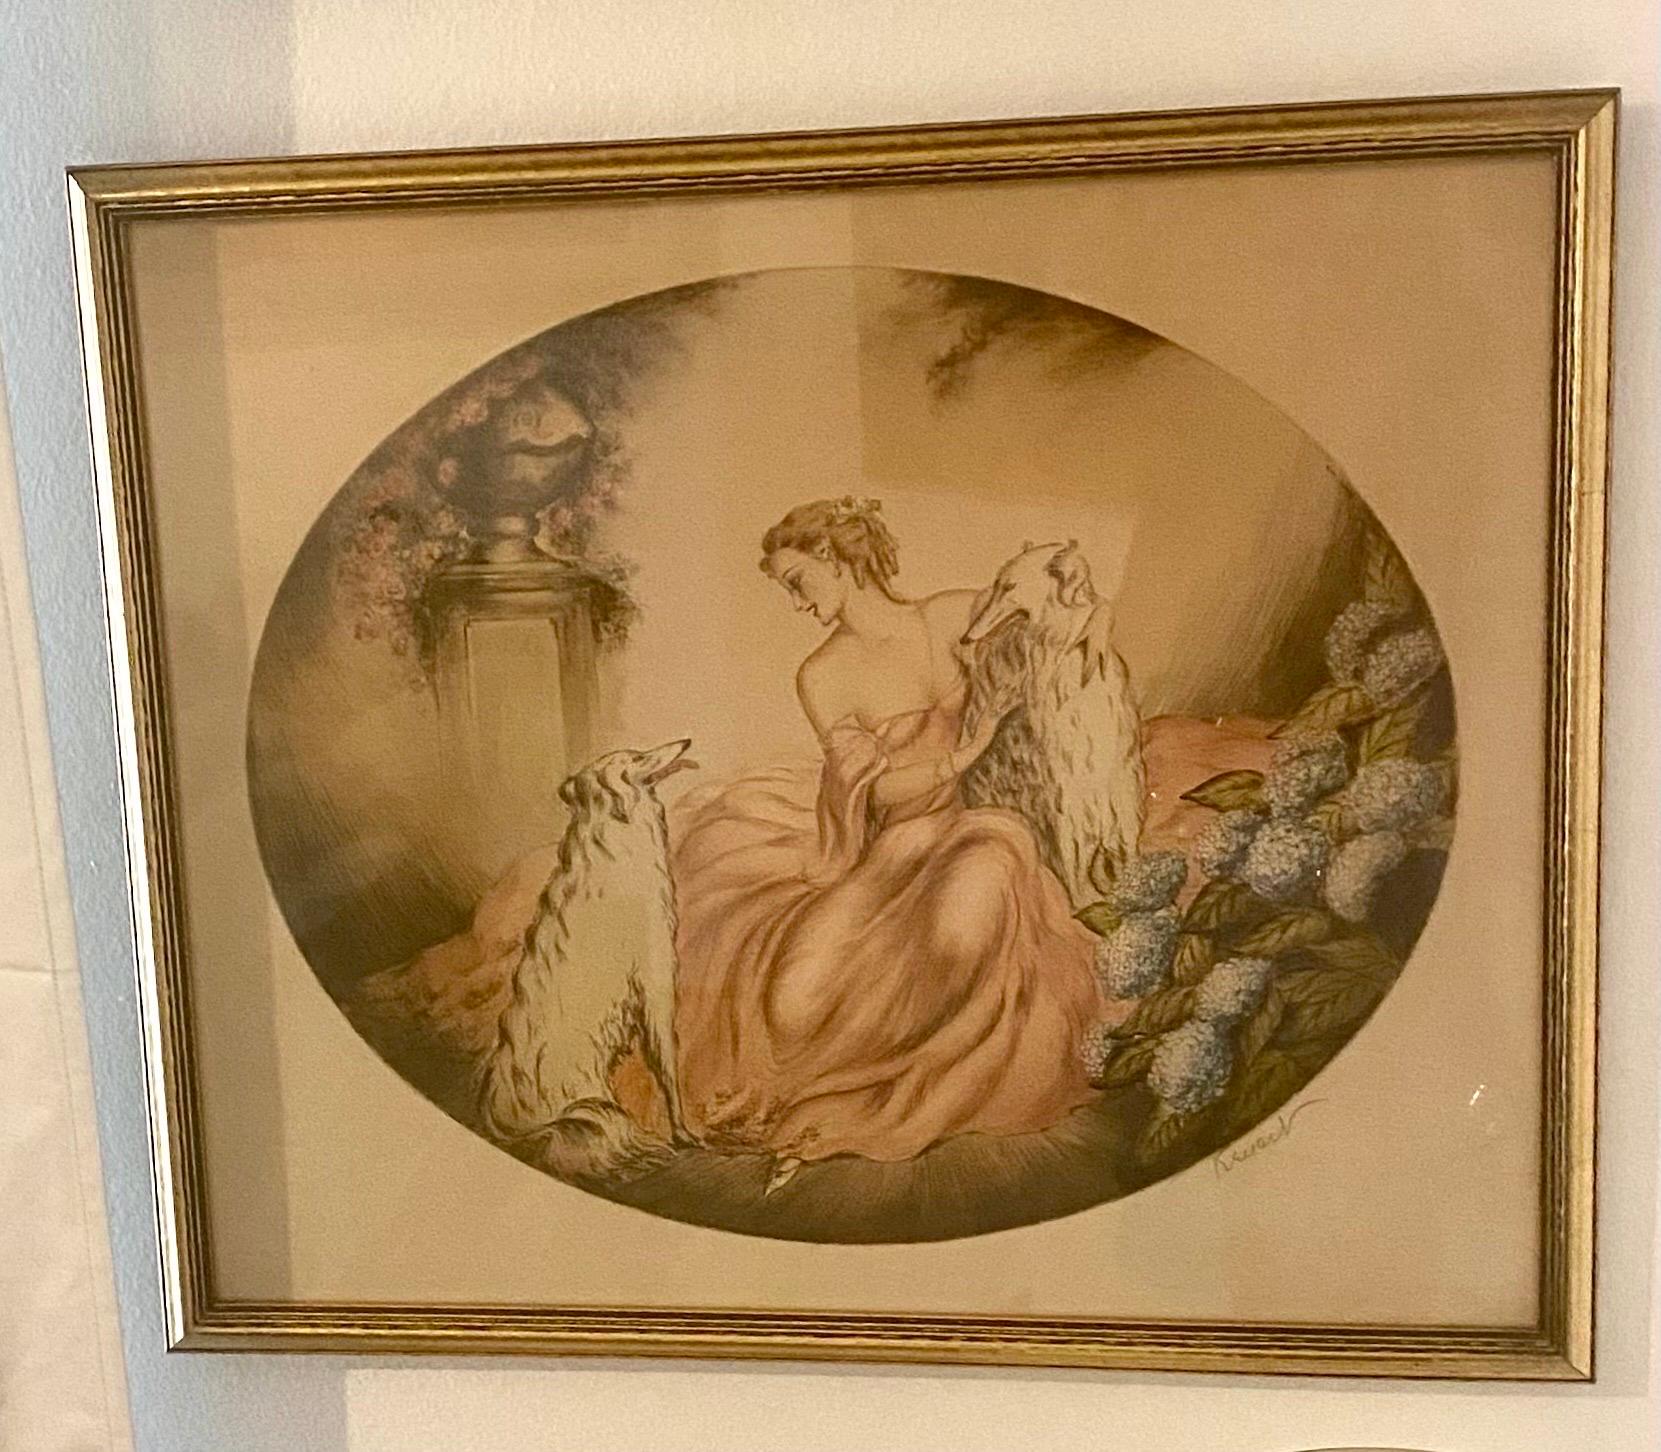 Beautiful French Art Deco colored lithograph of a woman with two Russian wolfhounds signed Renart, in the style of Louis Icart. This handmade lithograph is hand colored and signed by the artist. The gilt wood frame is original.